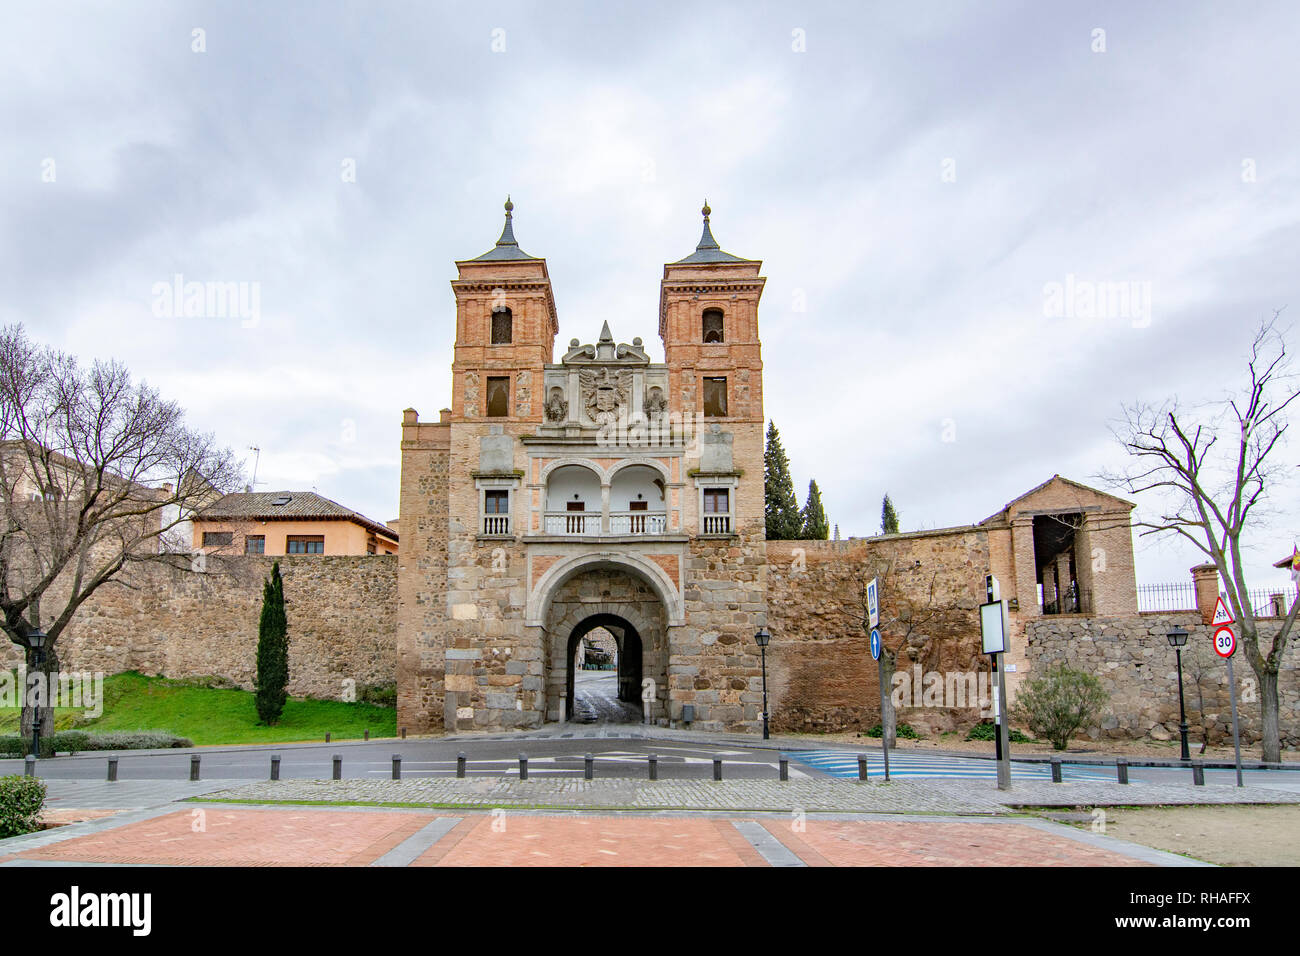 Toledo, Spain; February 2017: Puerta del CambrÃ³n is of Arabic origin and is one of the oldest entryways to the monumental city of Toledo Stock Photo